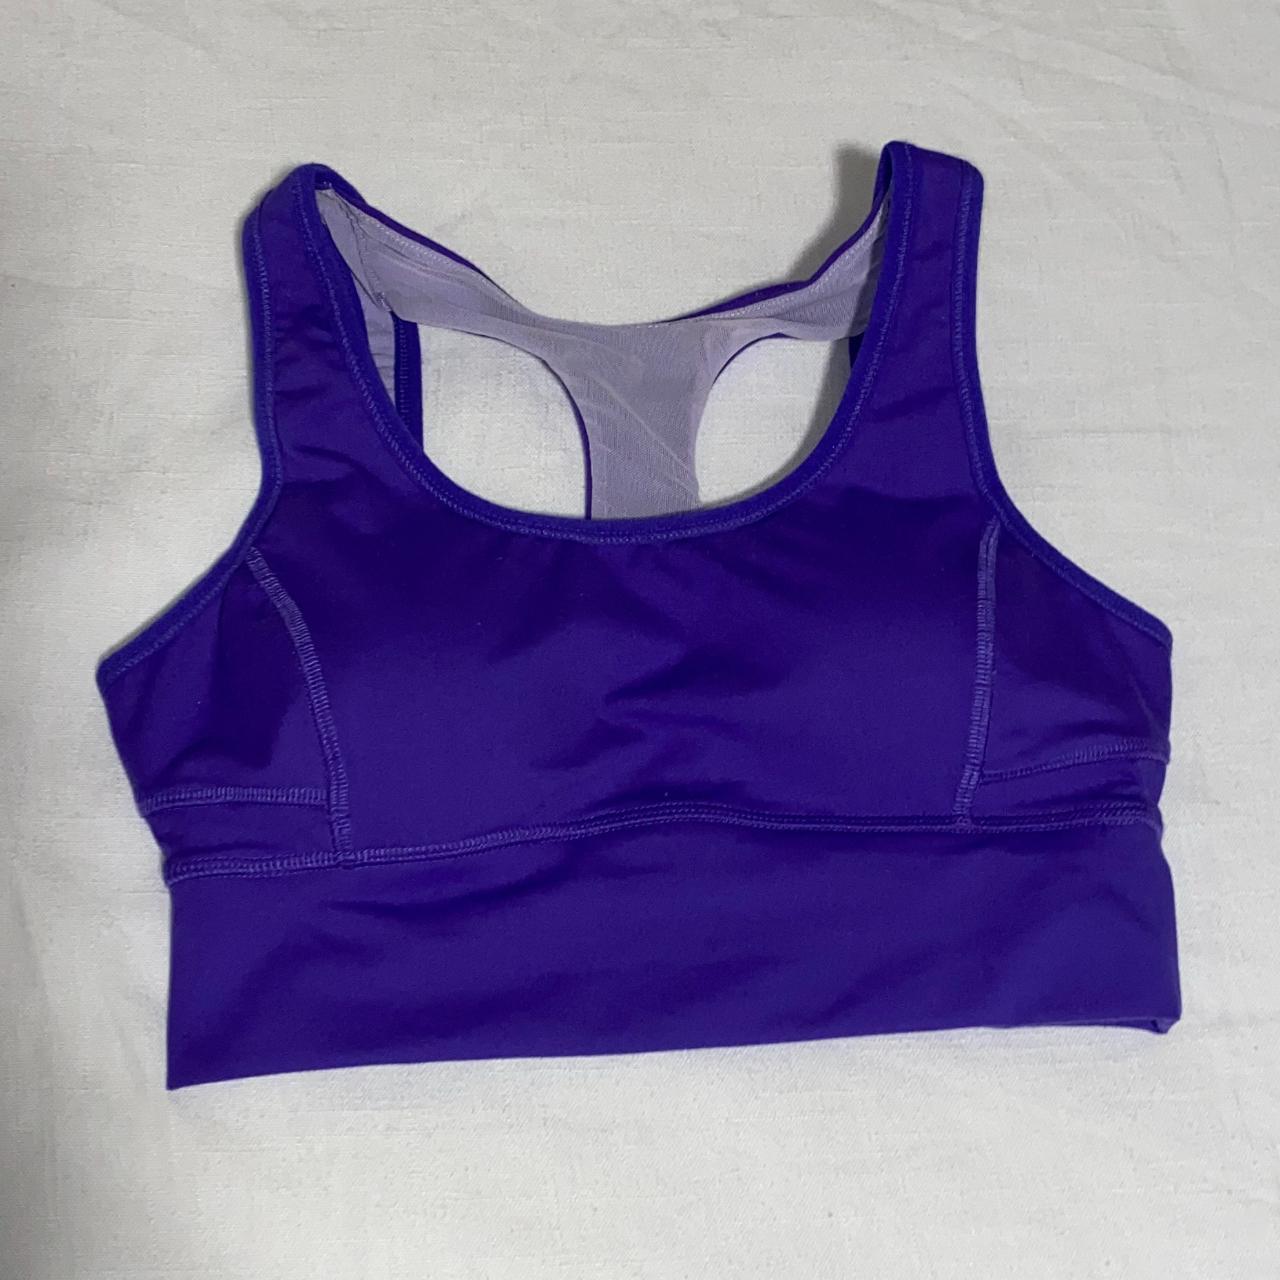 size small DSG sports bra with built in padding. it